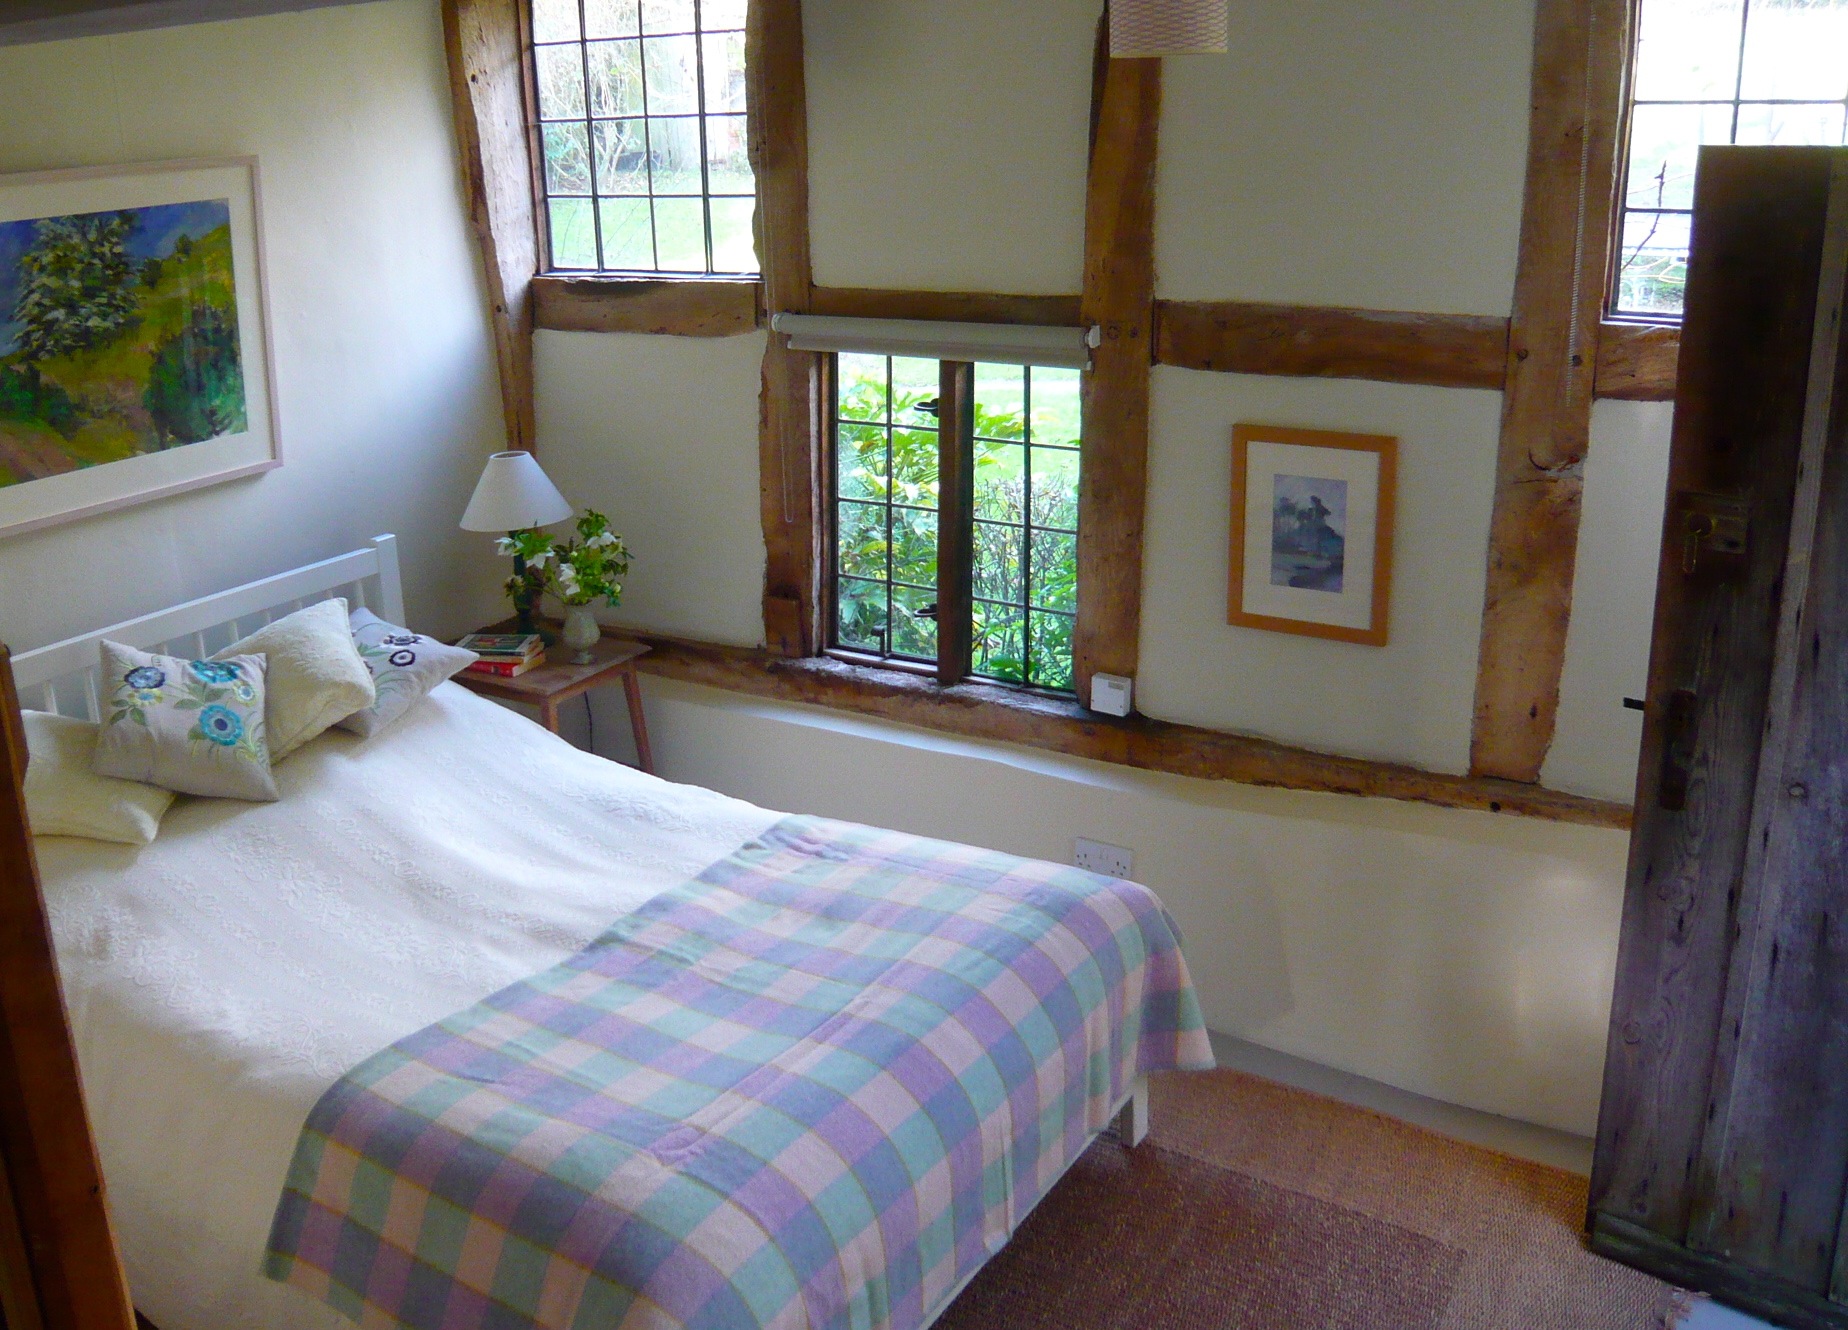 The annexe, bed area